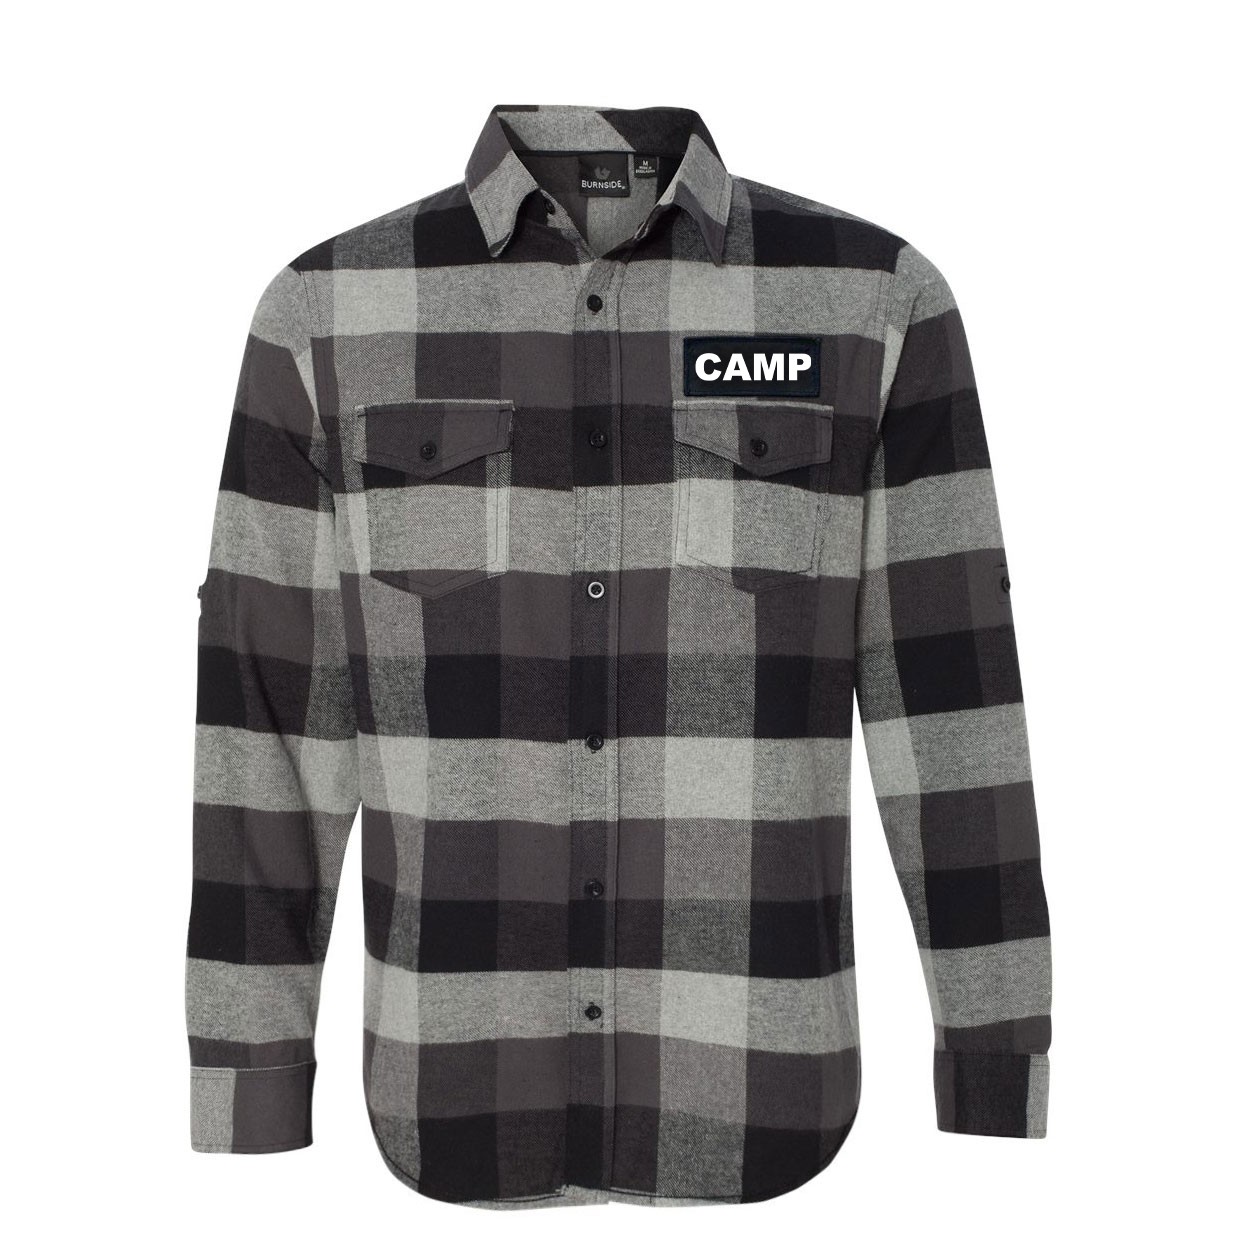 Camp Brand Logo Classic Unisex Long Sleeve Woven Patch Flannel Shirt Black/Gray (White Logo)